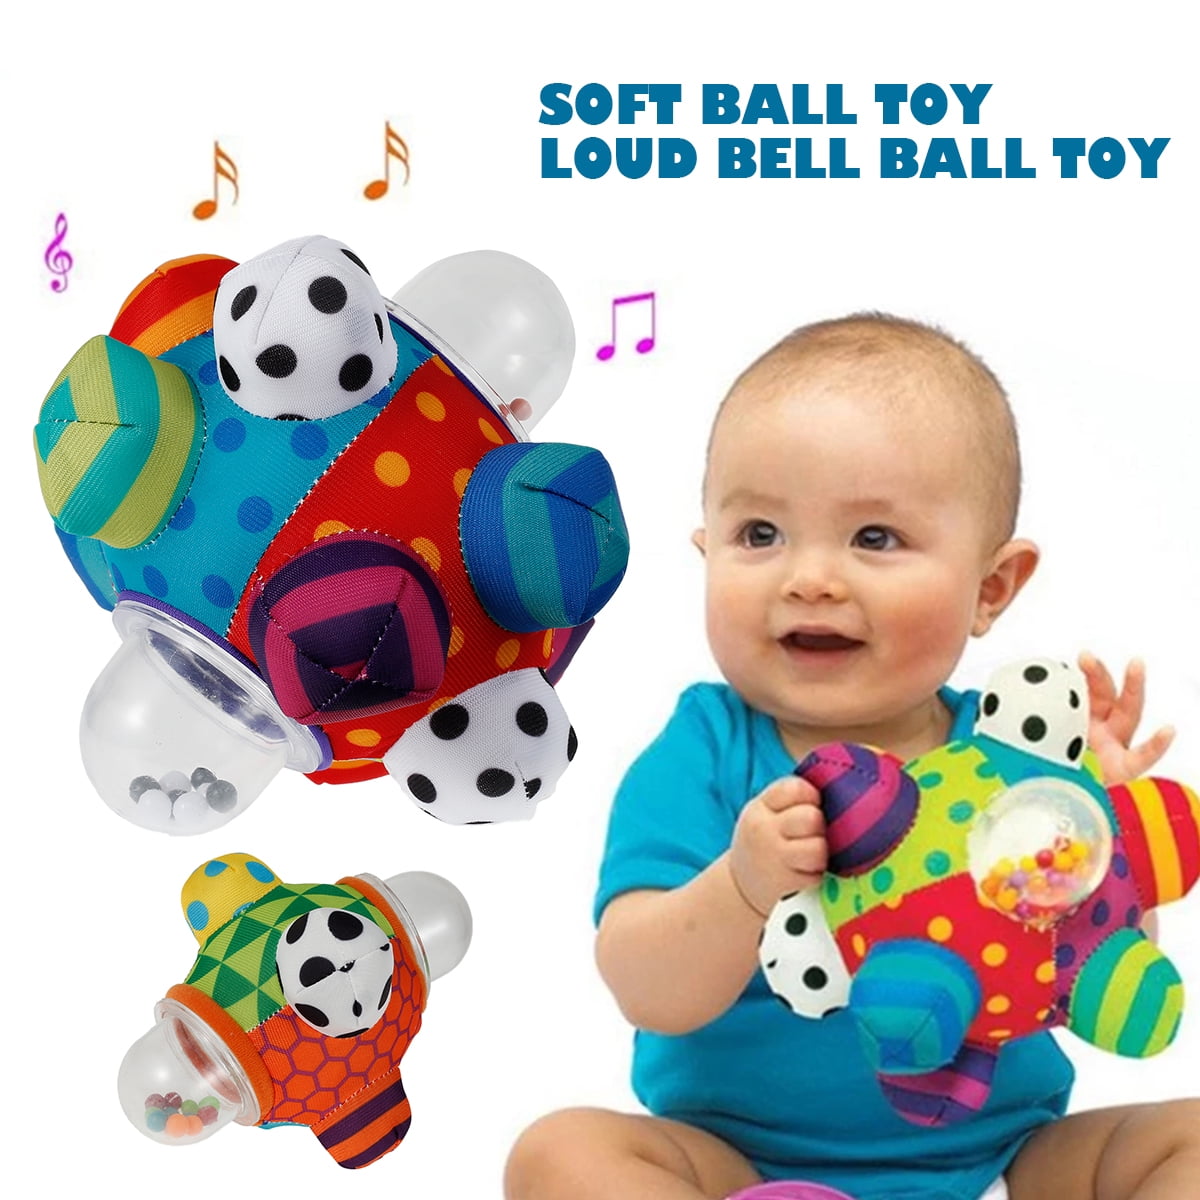 Figure Baby Ball Rattle Toy Small Colorful Plush Sensory Ball Easy to Grasp for Newborn Infant Toddler